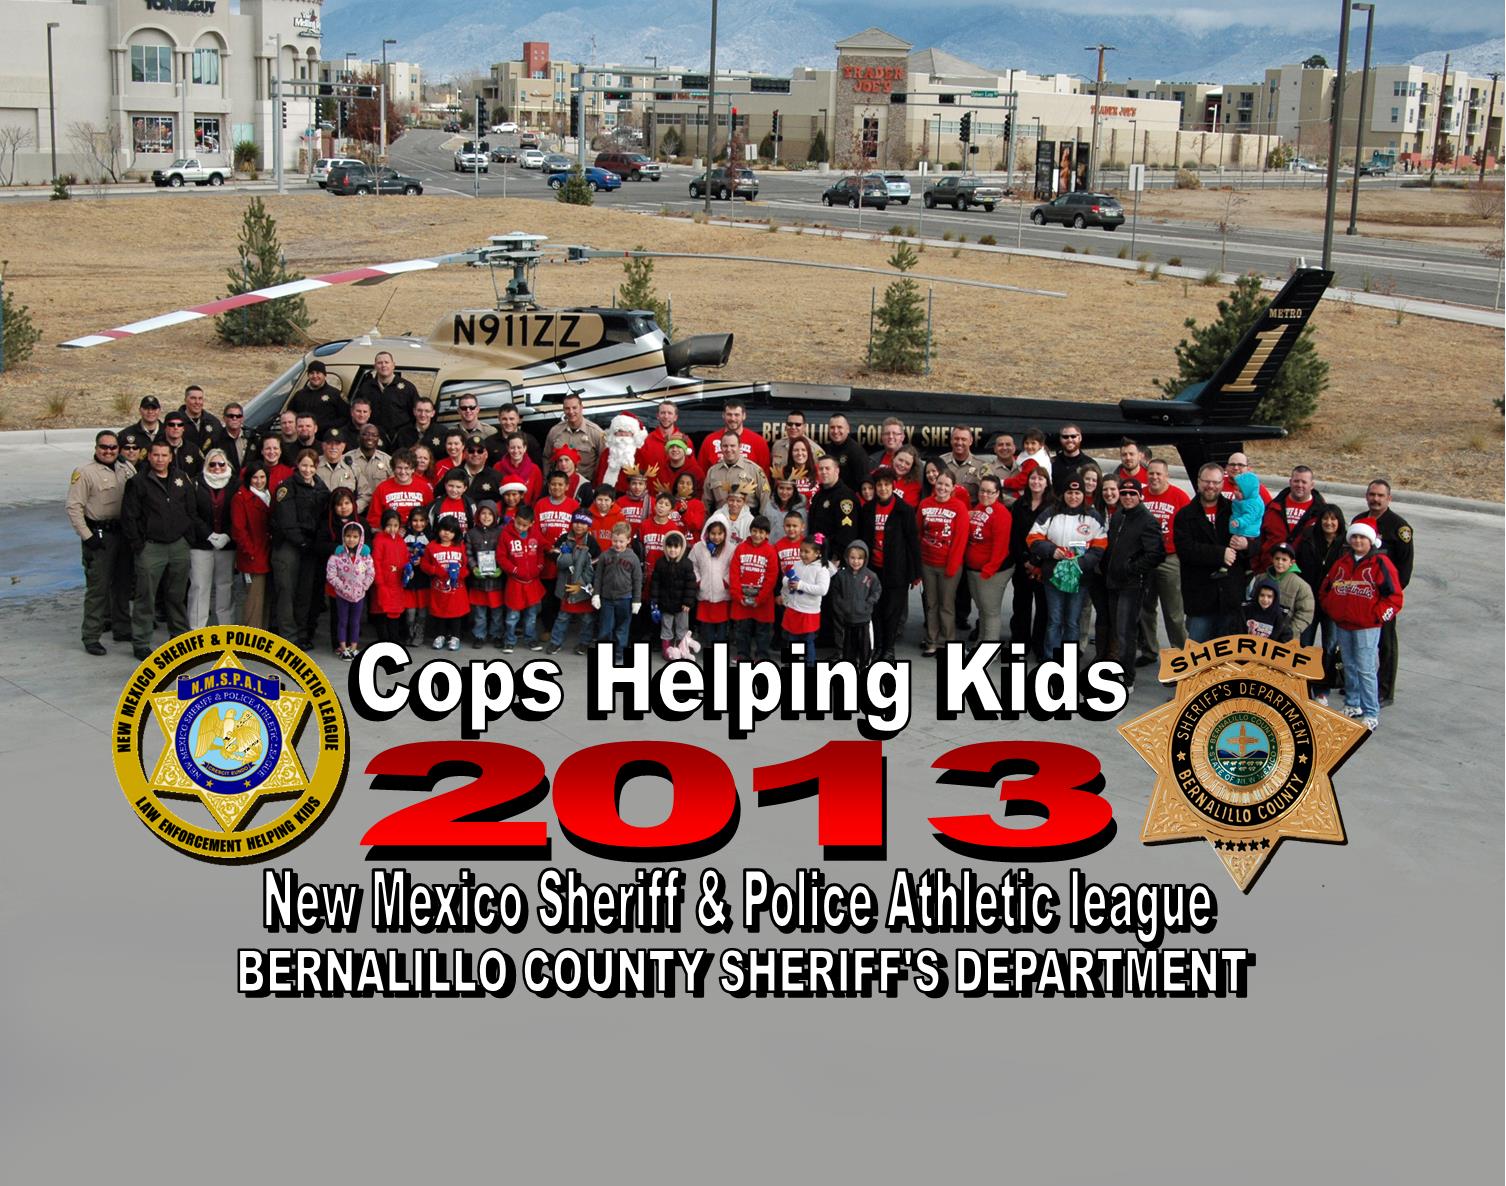 2013 NMSPAL Cops for Kids Group Photo